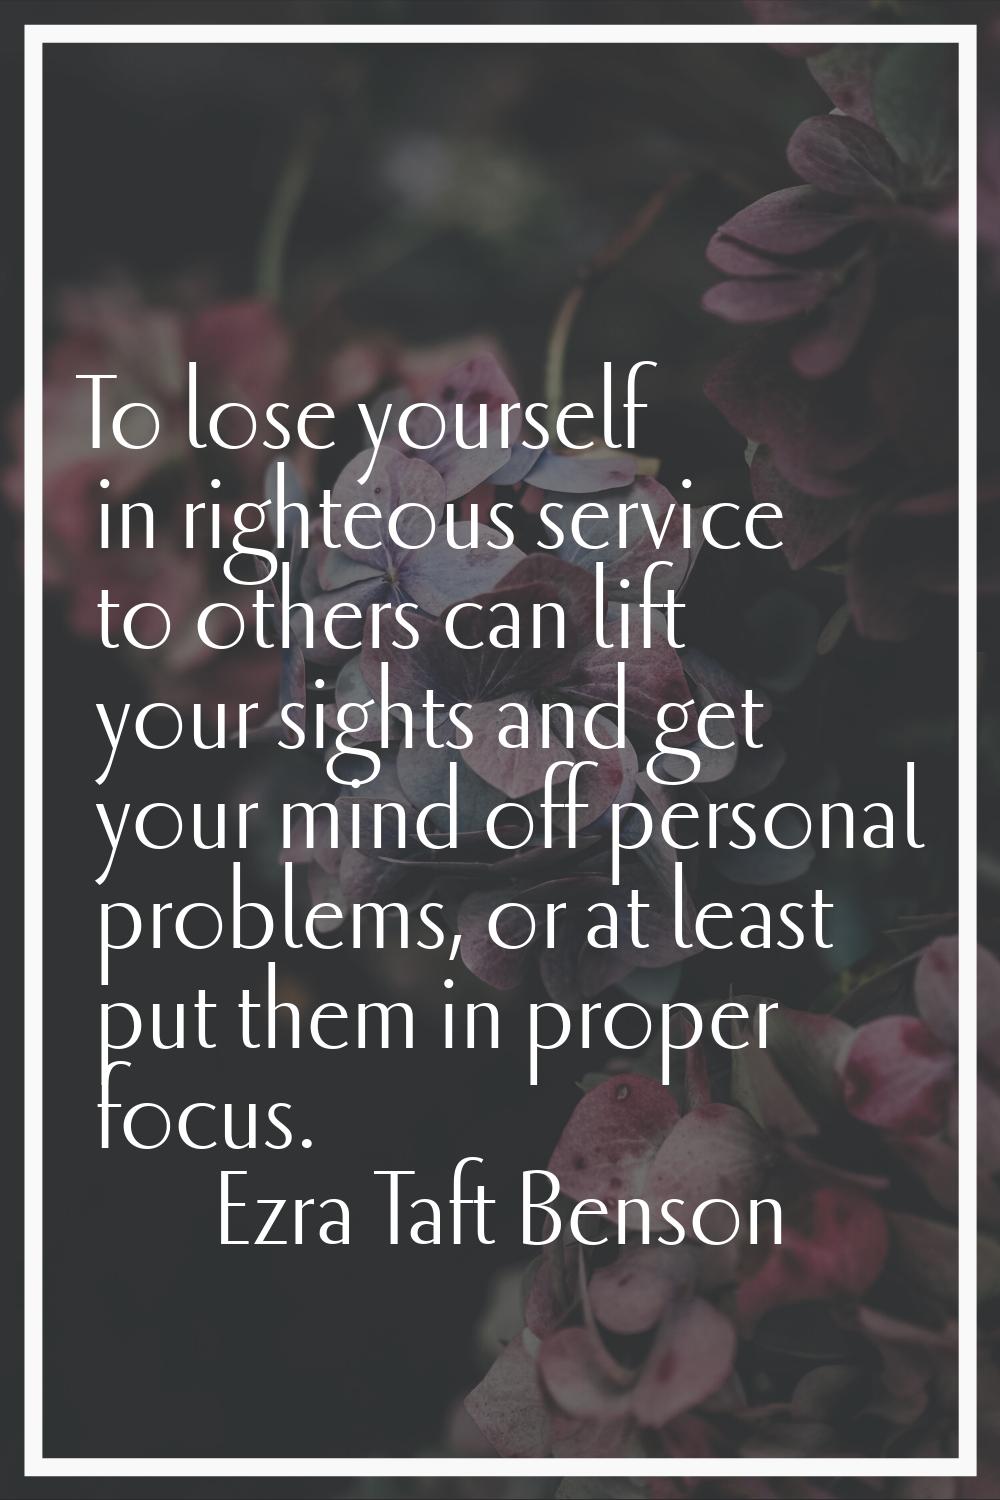 To lose yourself in righteous service to others can lift your sights and get your mind off personal